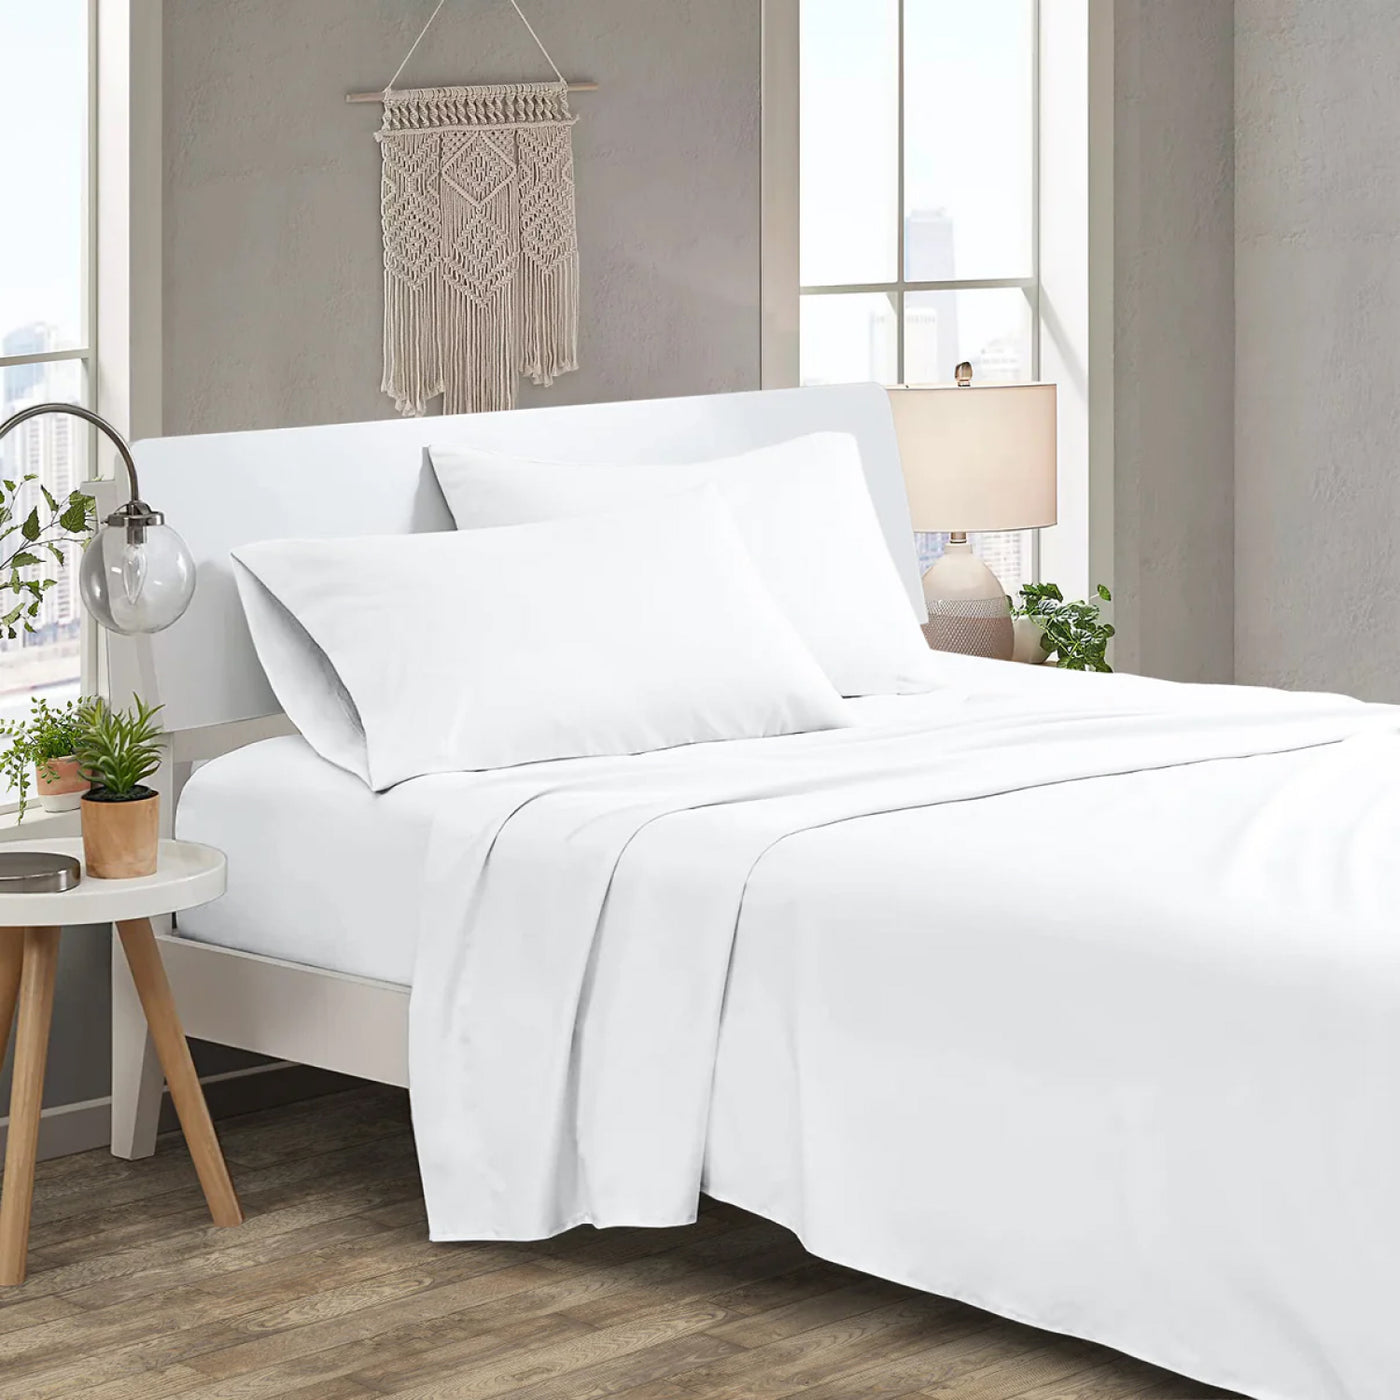 300 TC Egyptian Cotton 3 Piece Solid Flat Bed Sheet - White